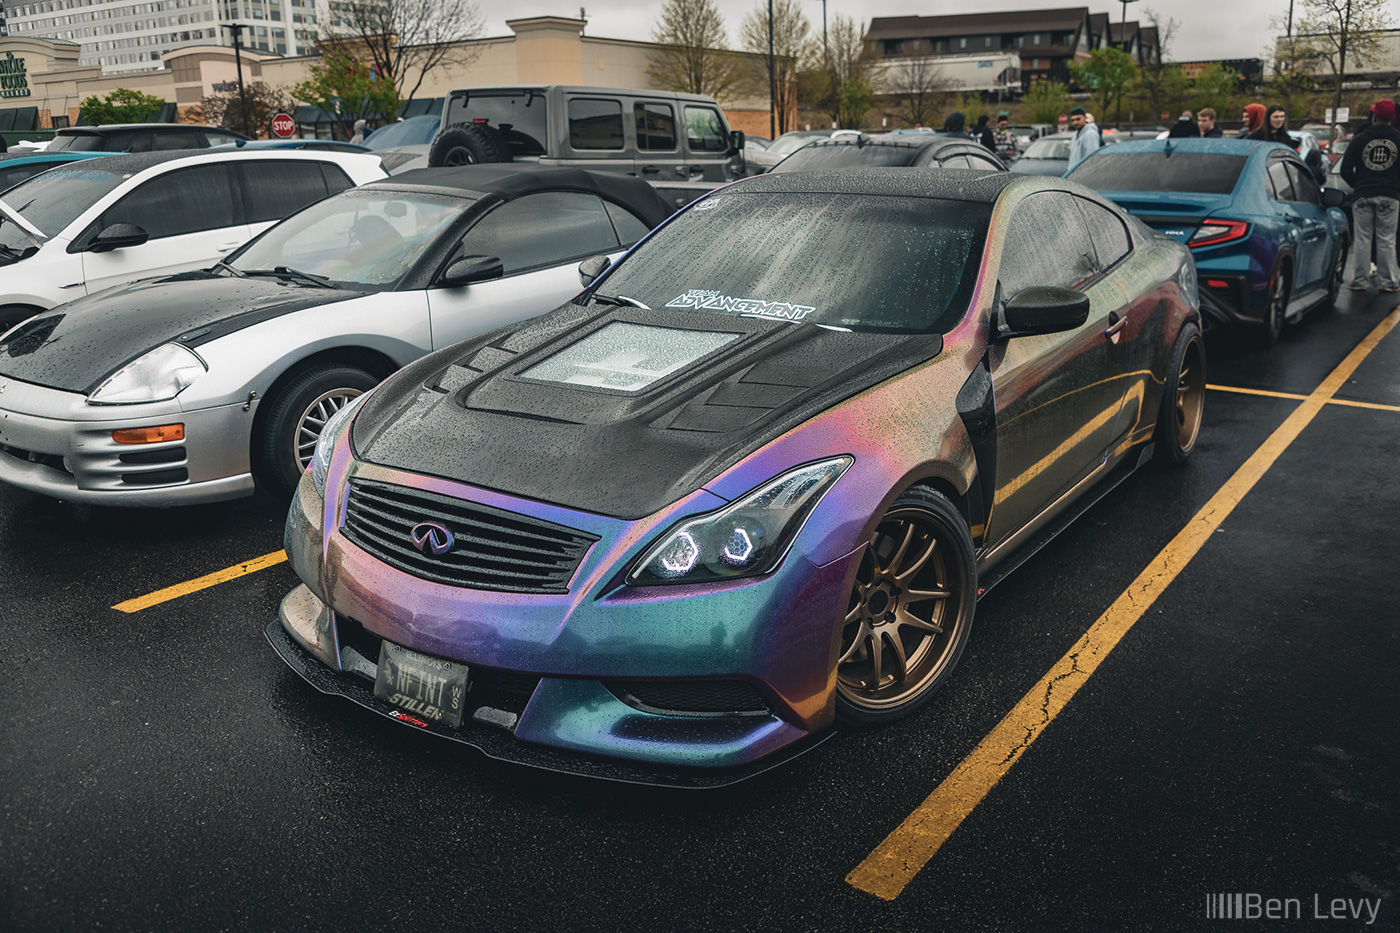 Translucent Hood on Infiniti G37 Coupe from Team Advancement